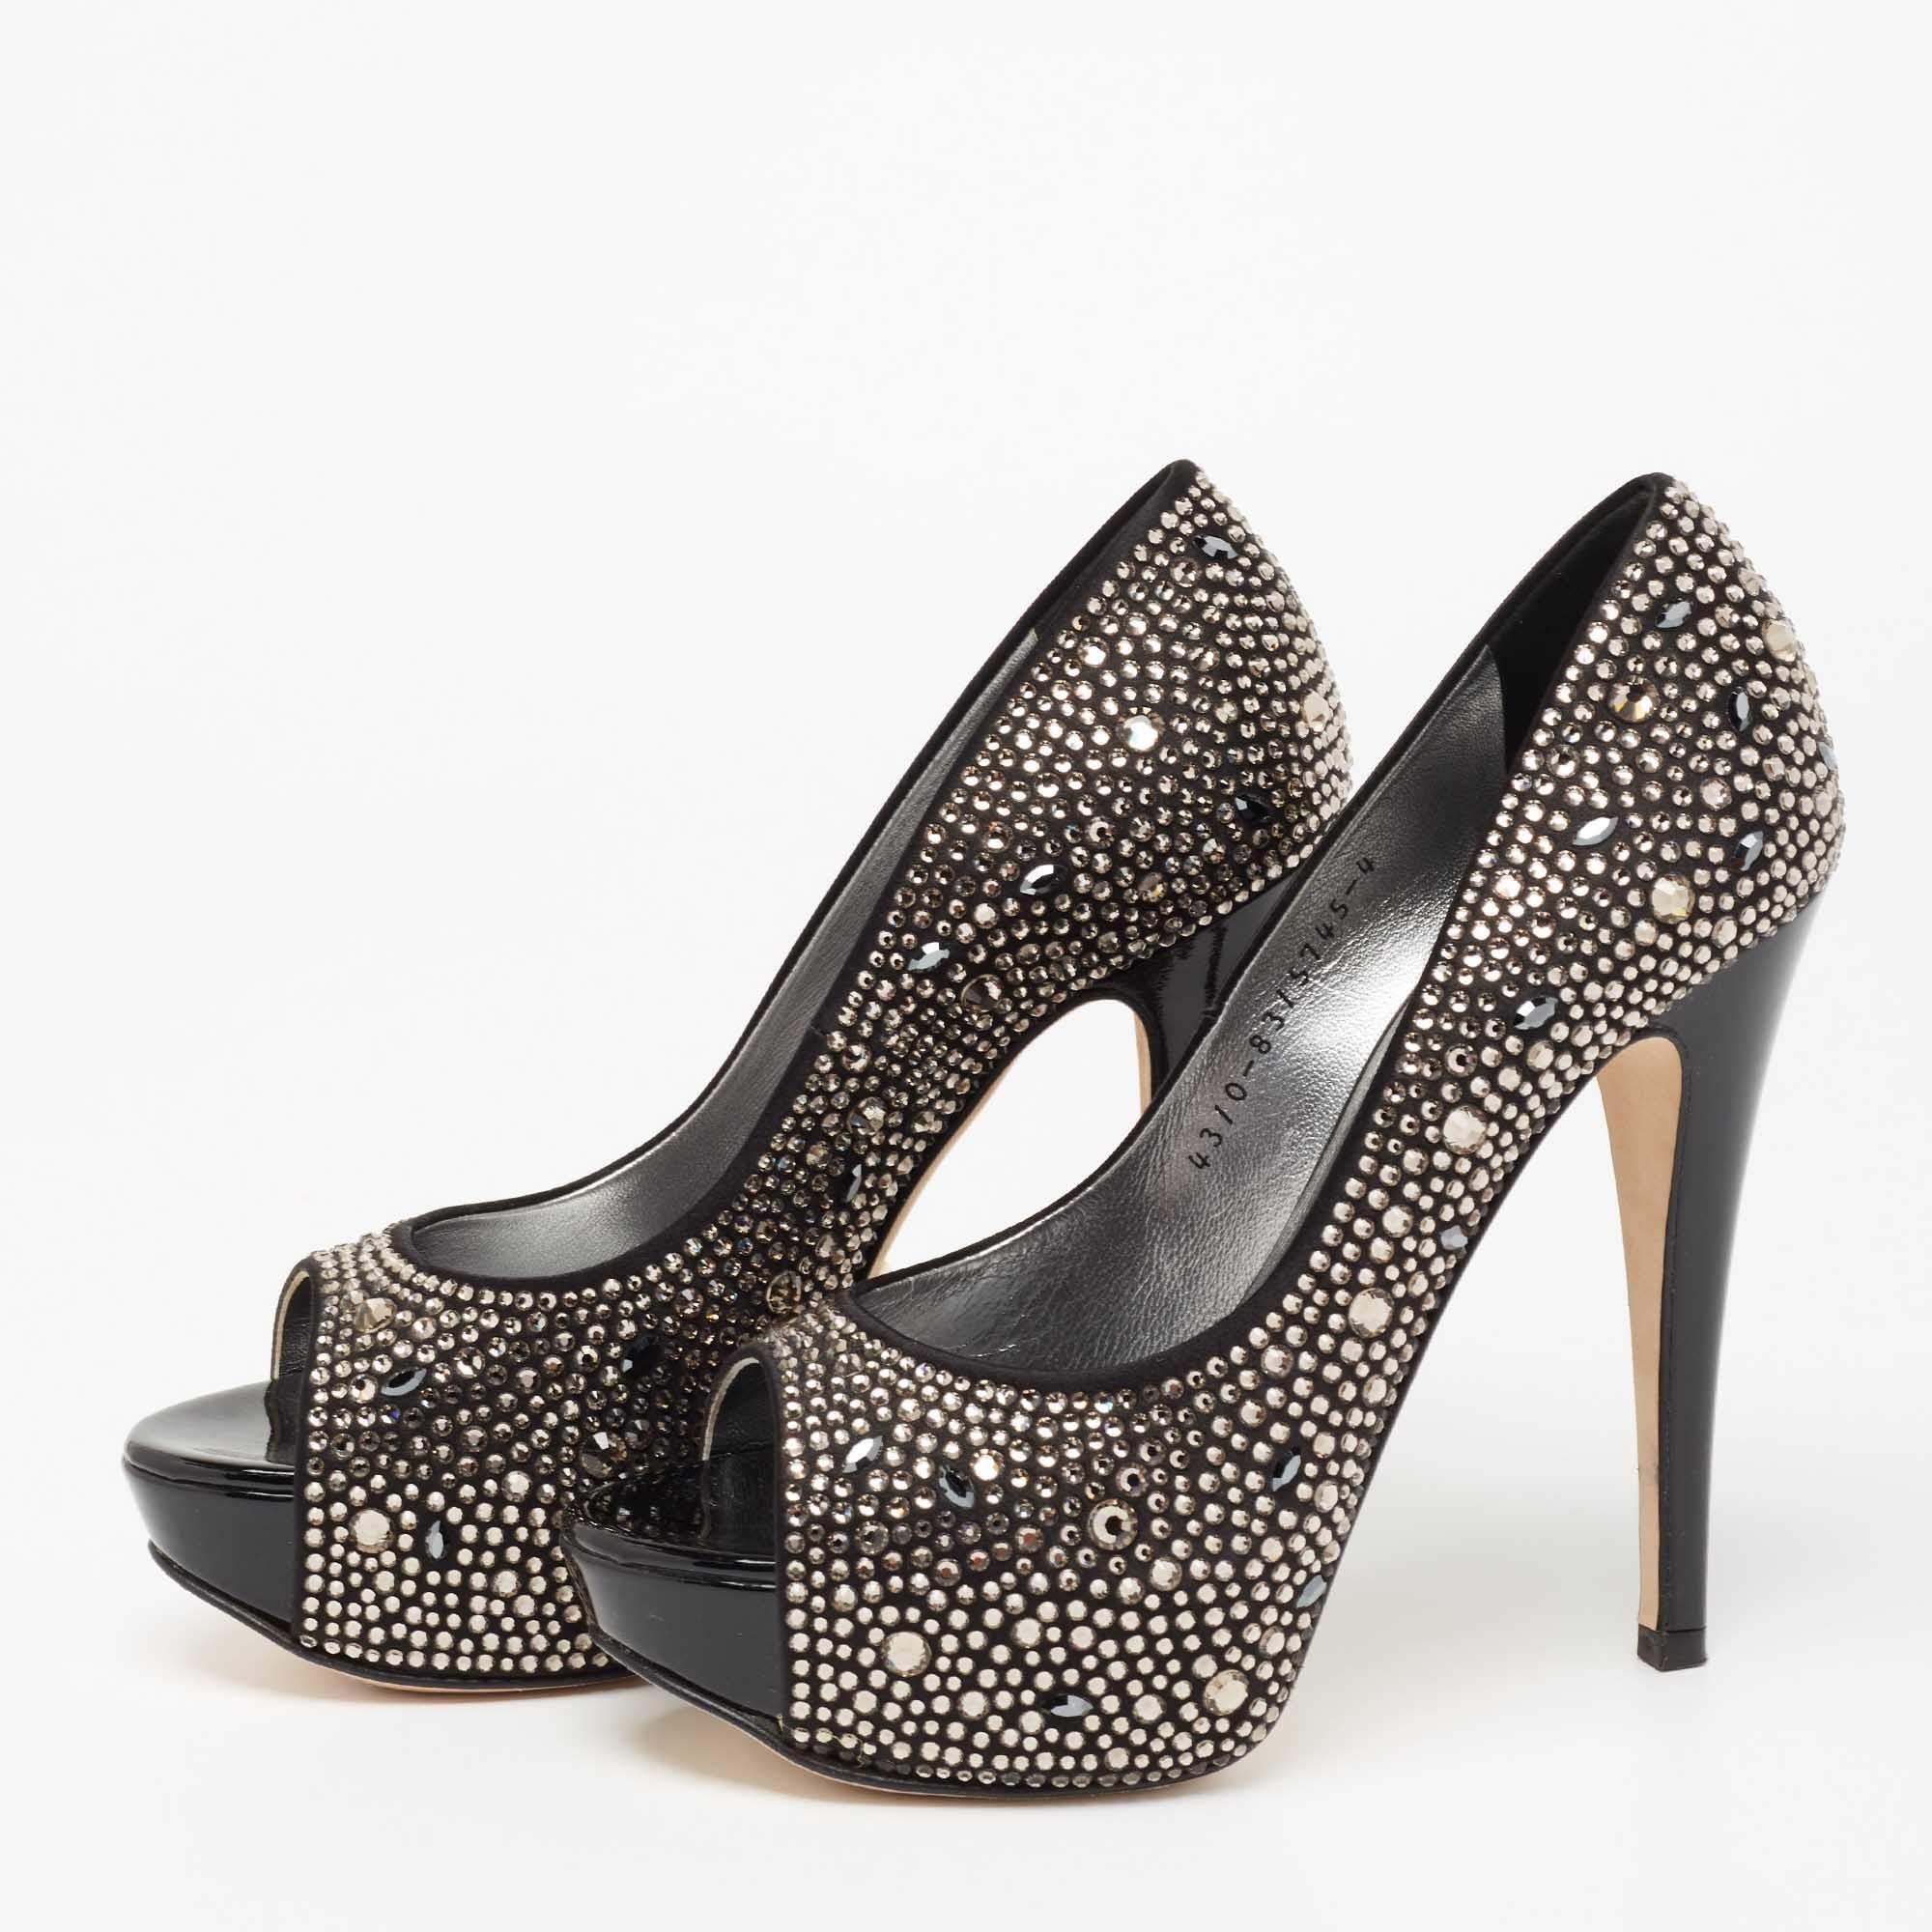 Take every step with elegance and style in these pumps from the House of Gina. They are crafted meticulously using black satin, which is highlighted with crystal embellishments. They showcase platforms, peep toes, and tall heels. These pumps will be